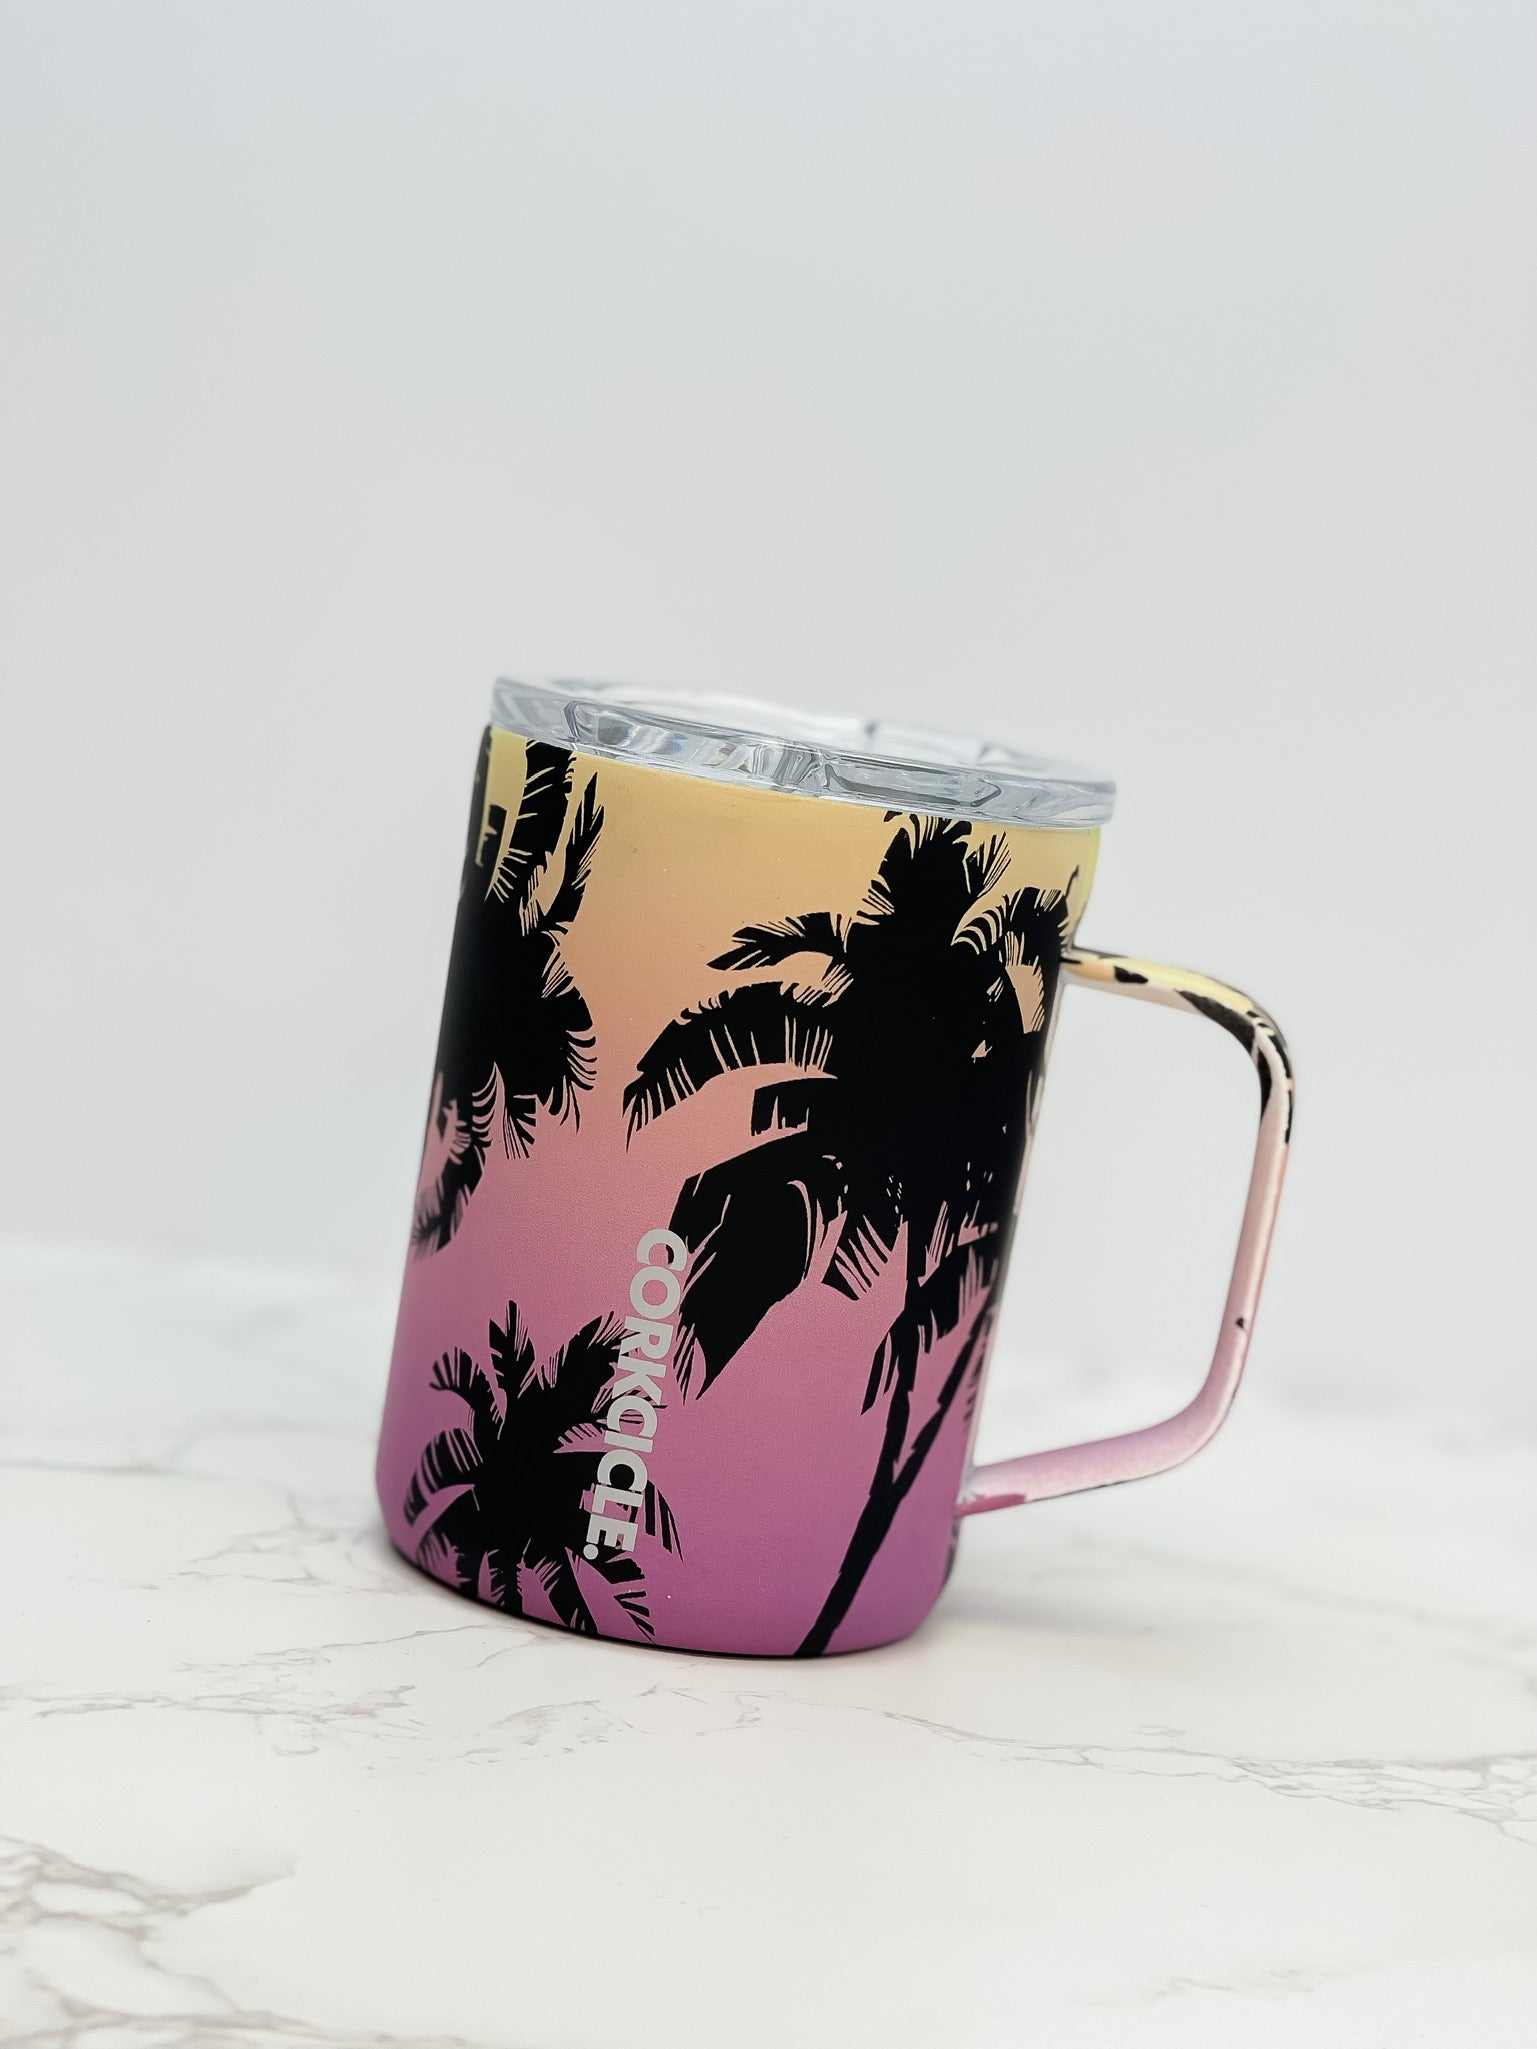 Miami Sunset 16 oz Stainless Steel Travel Mug by Corkcicle